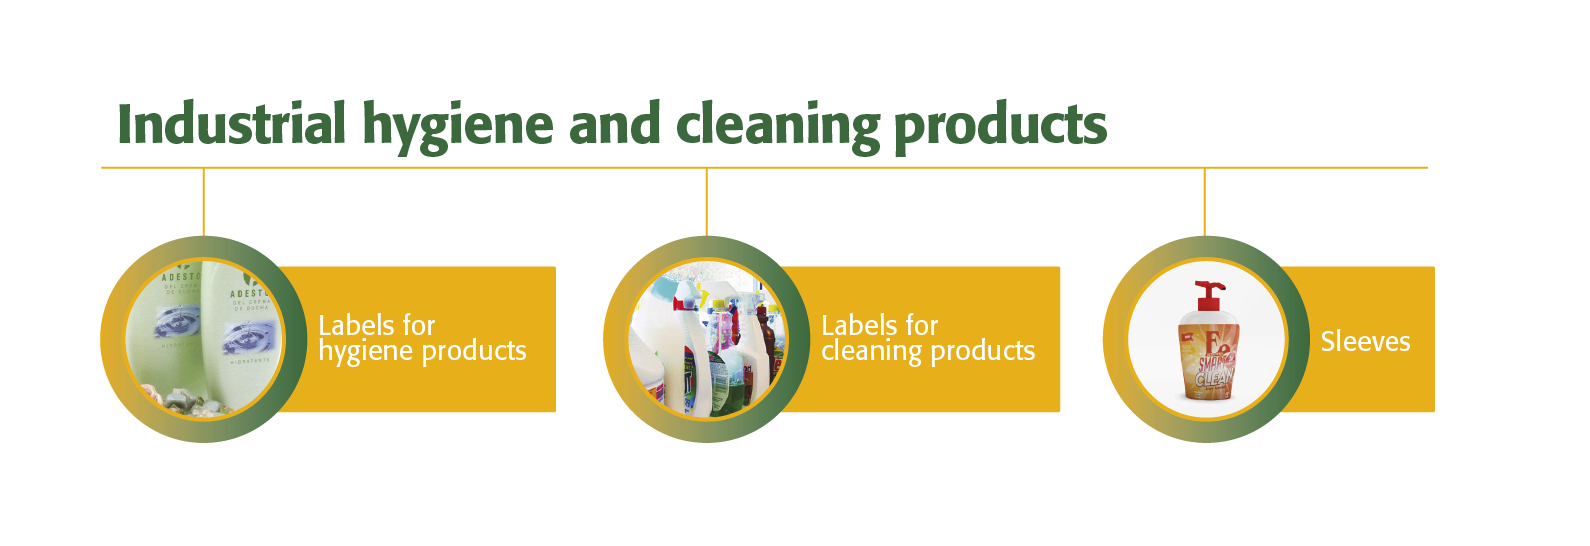 Hygiene and Cleaning Products Industry